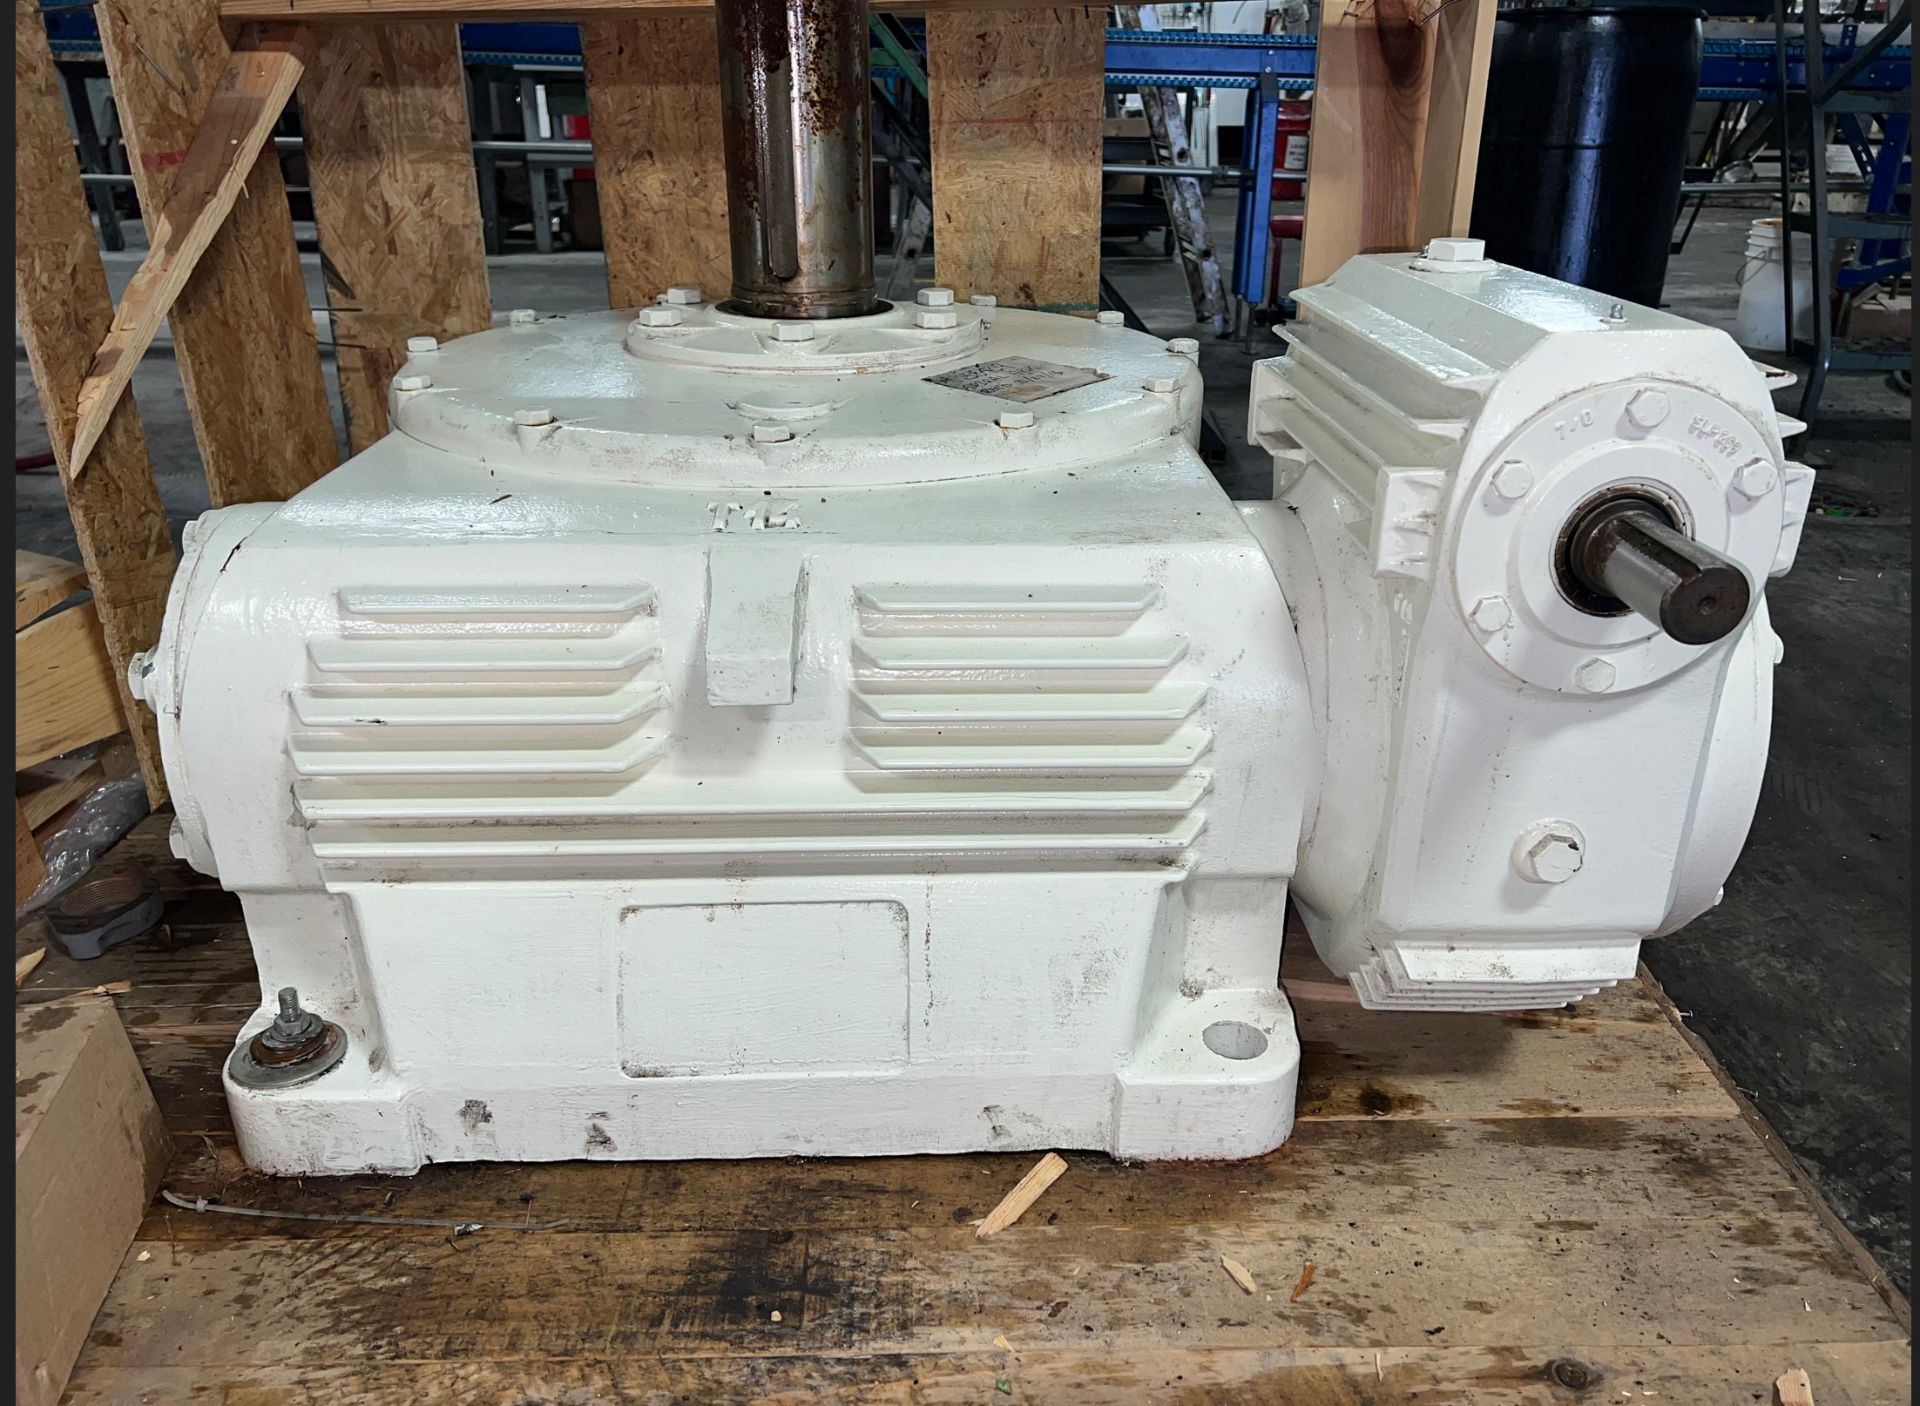 Never Used Gear Box for Spiral Freezer Gear - Large item 2500-pound, with 5" output shaft, 1.75"